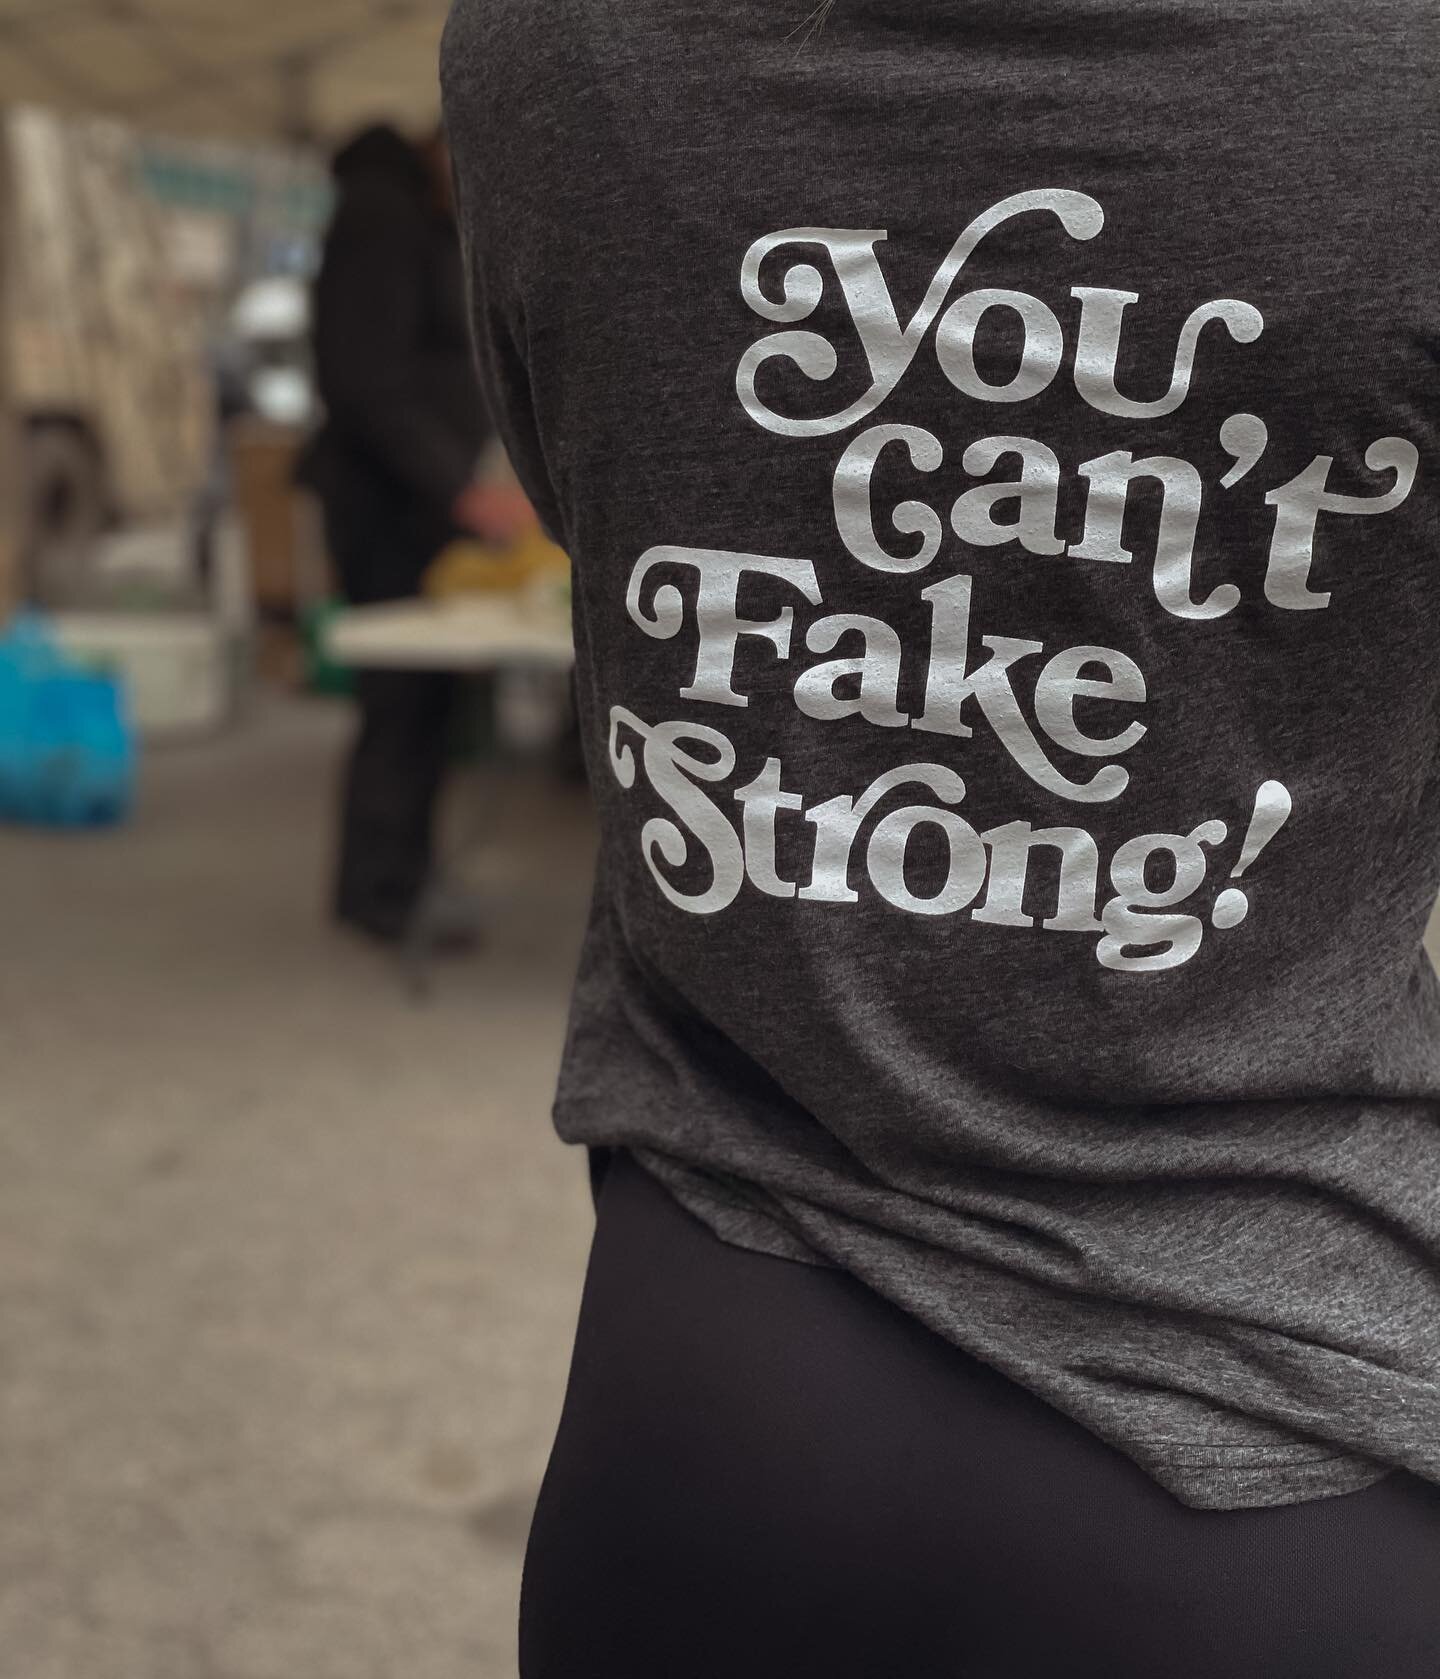 YOU CAN&rsquo;T FAKE STRONG 💪🏻

THE @goodlifeclothing X STRONG NEW YORK COLLAB DROPS TOMORROW AT 9AM.

LIMITED RUN !!!! GET READY TO SHOP. 
#strongnewyork #goodlifexstrongnewyork